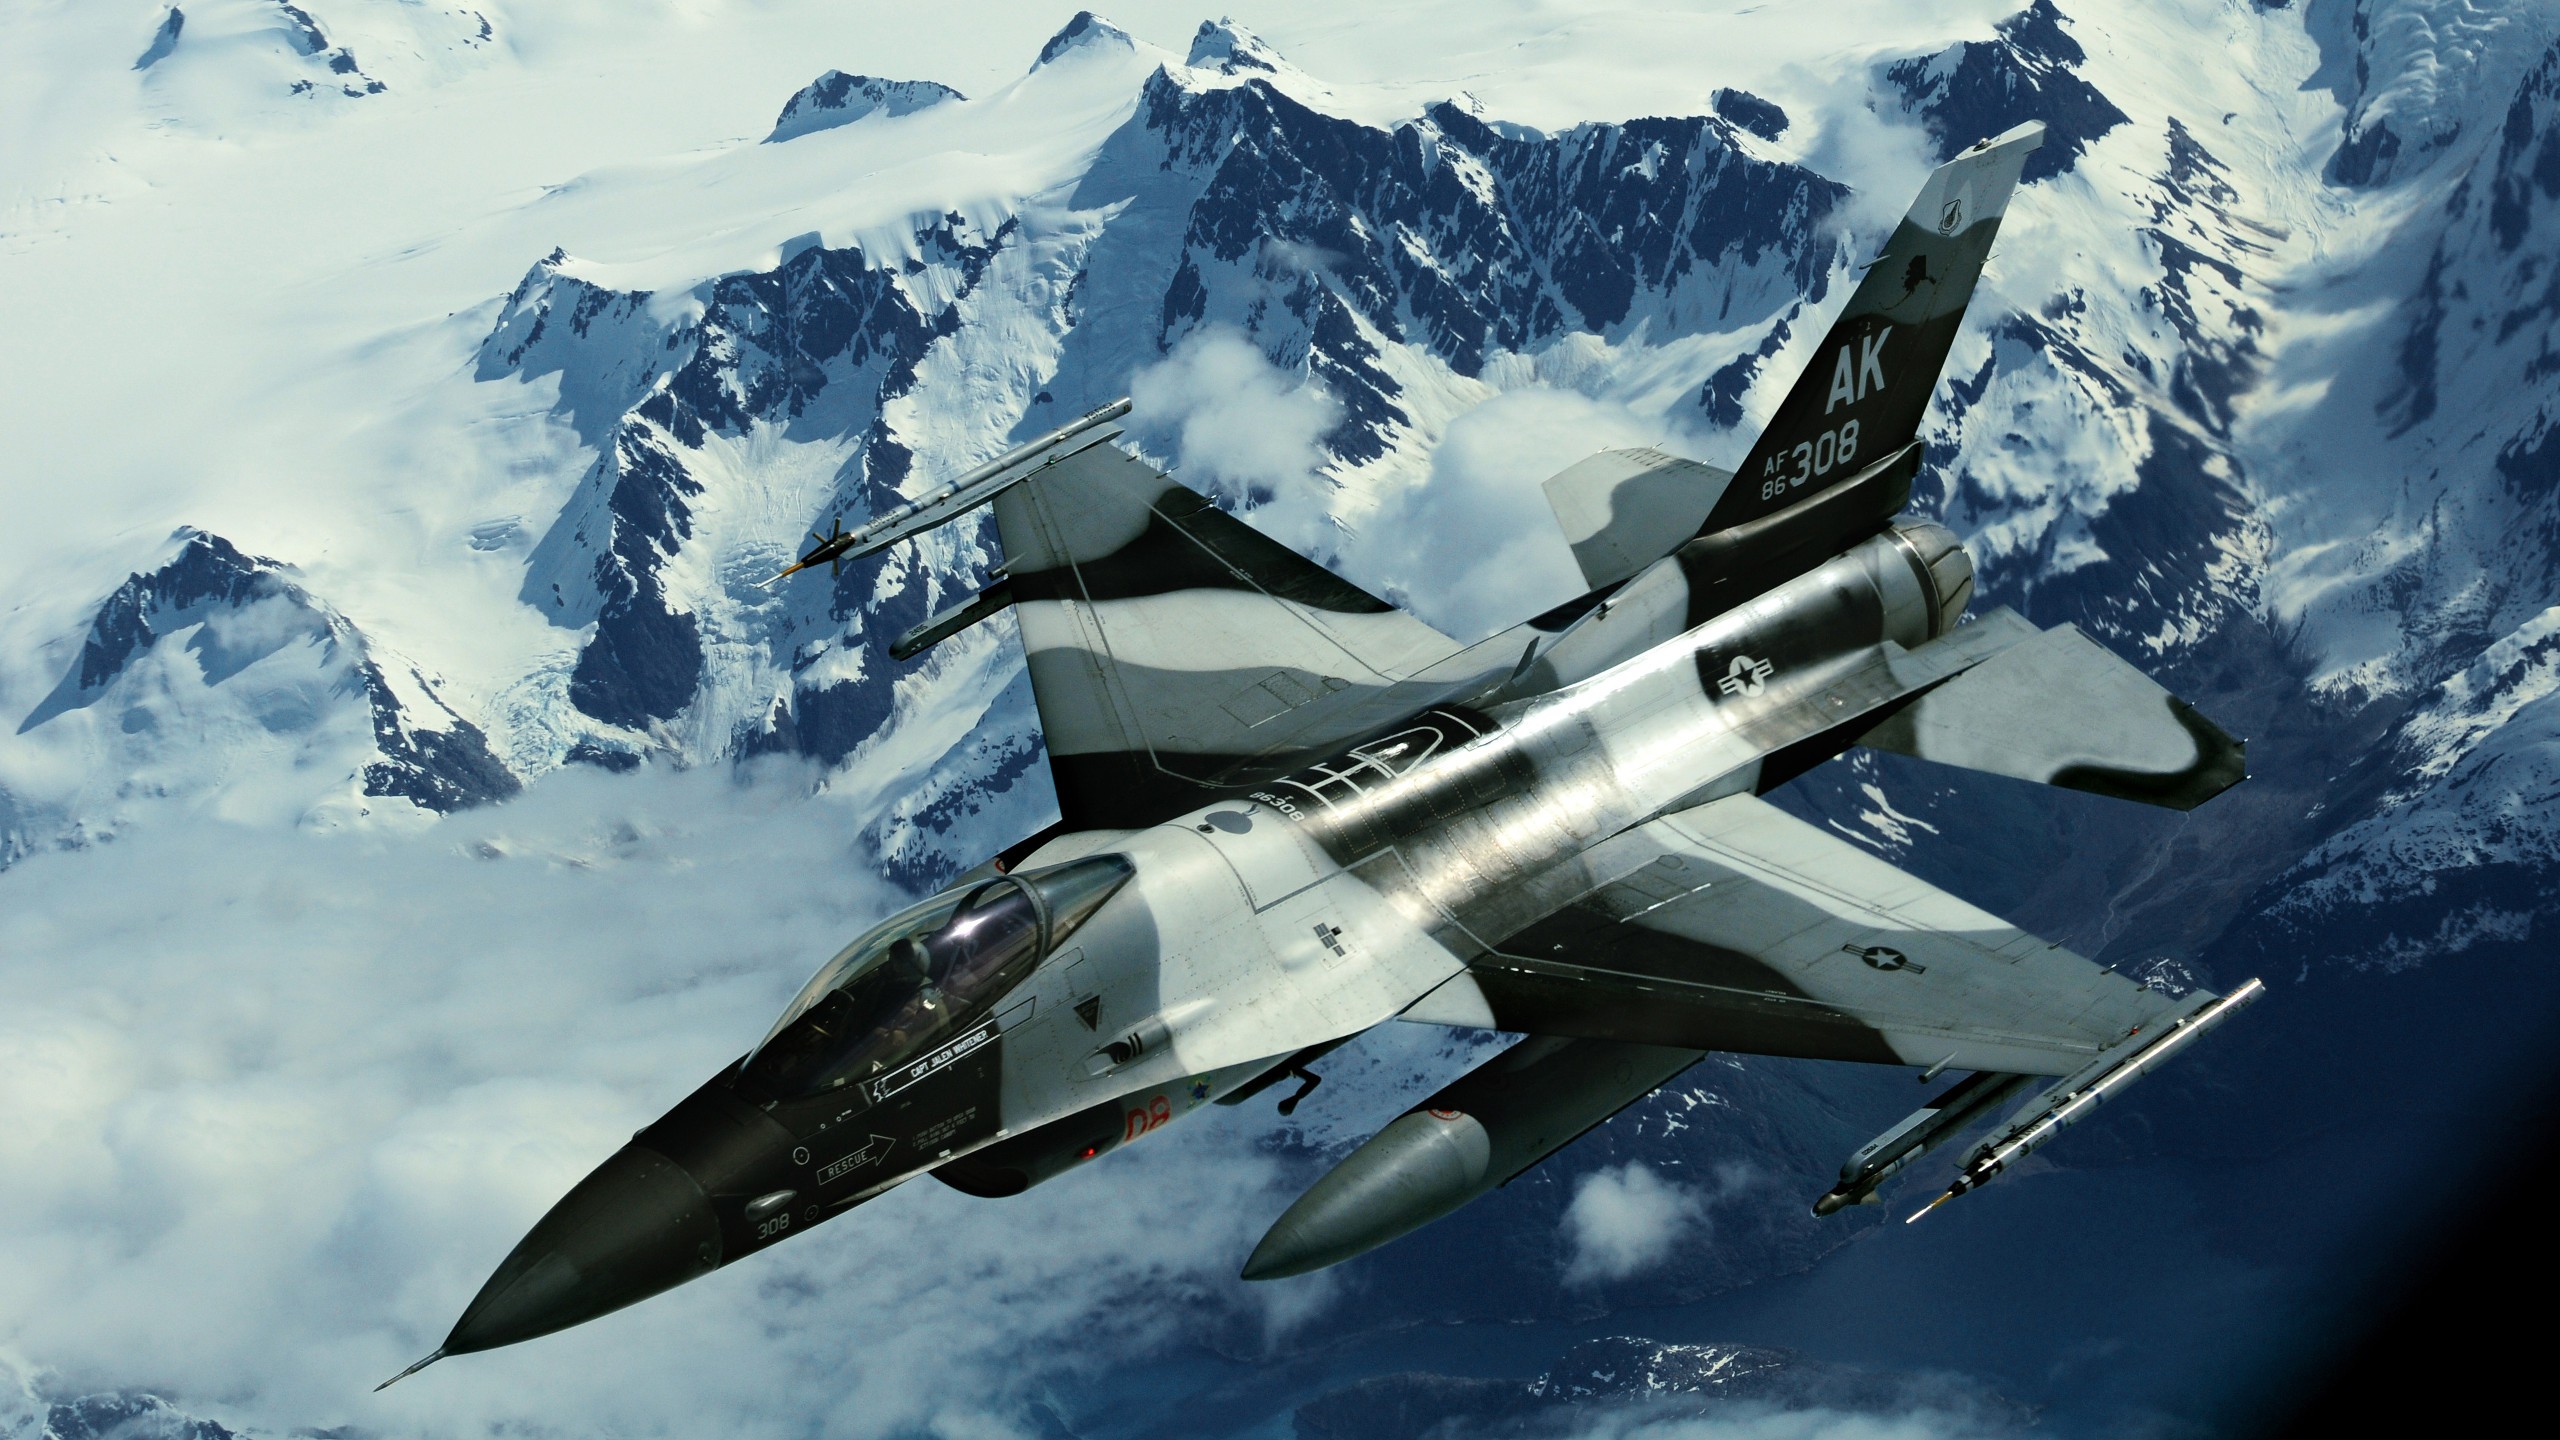 General 2560x1440 General Dynamics F-16 Fighting Falcon Alaska military vehicle aircraft military aircraft numbers US Air Force jet fighter camouflage General Dynamics vehicle military American aircraft snow